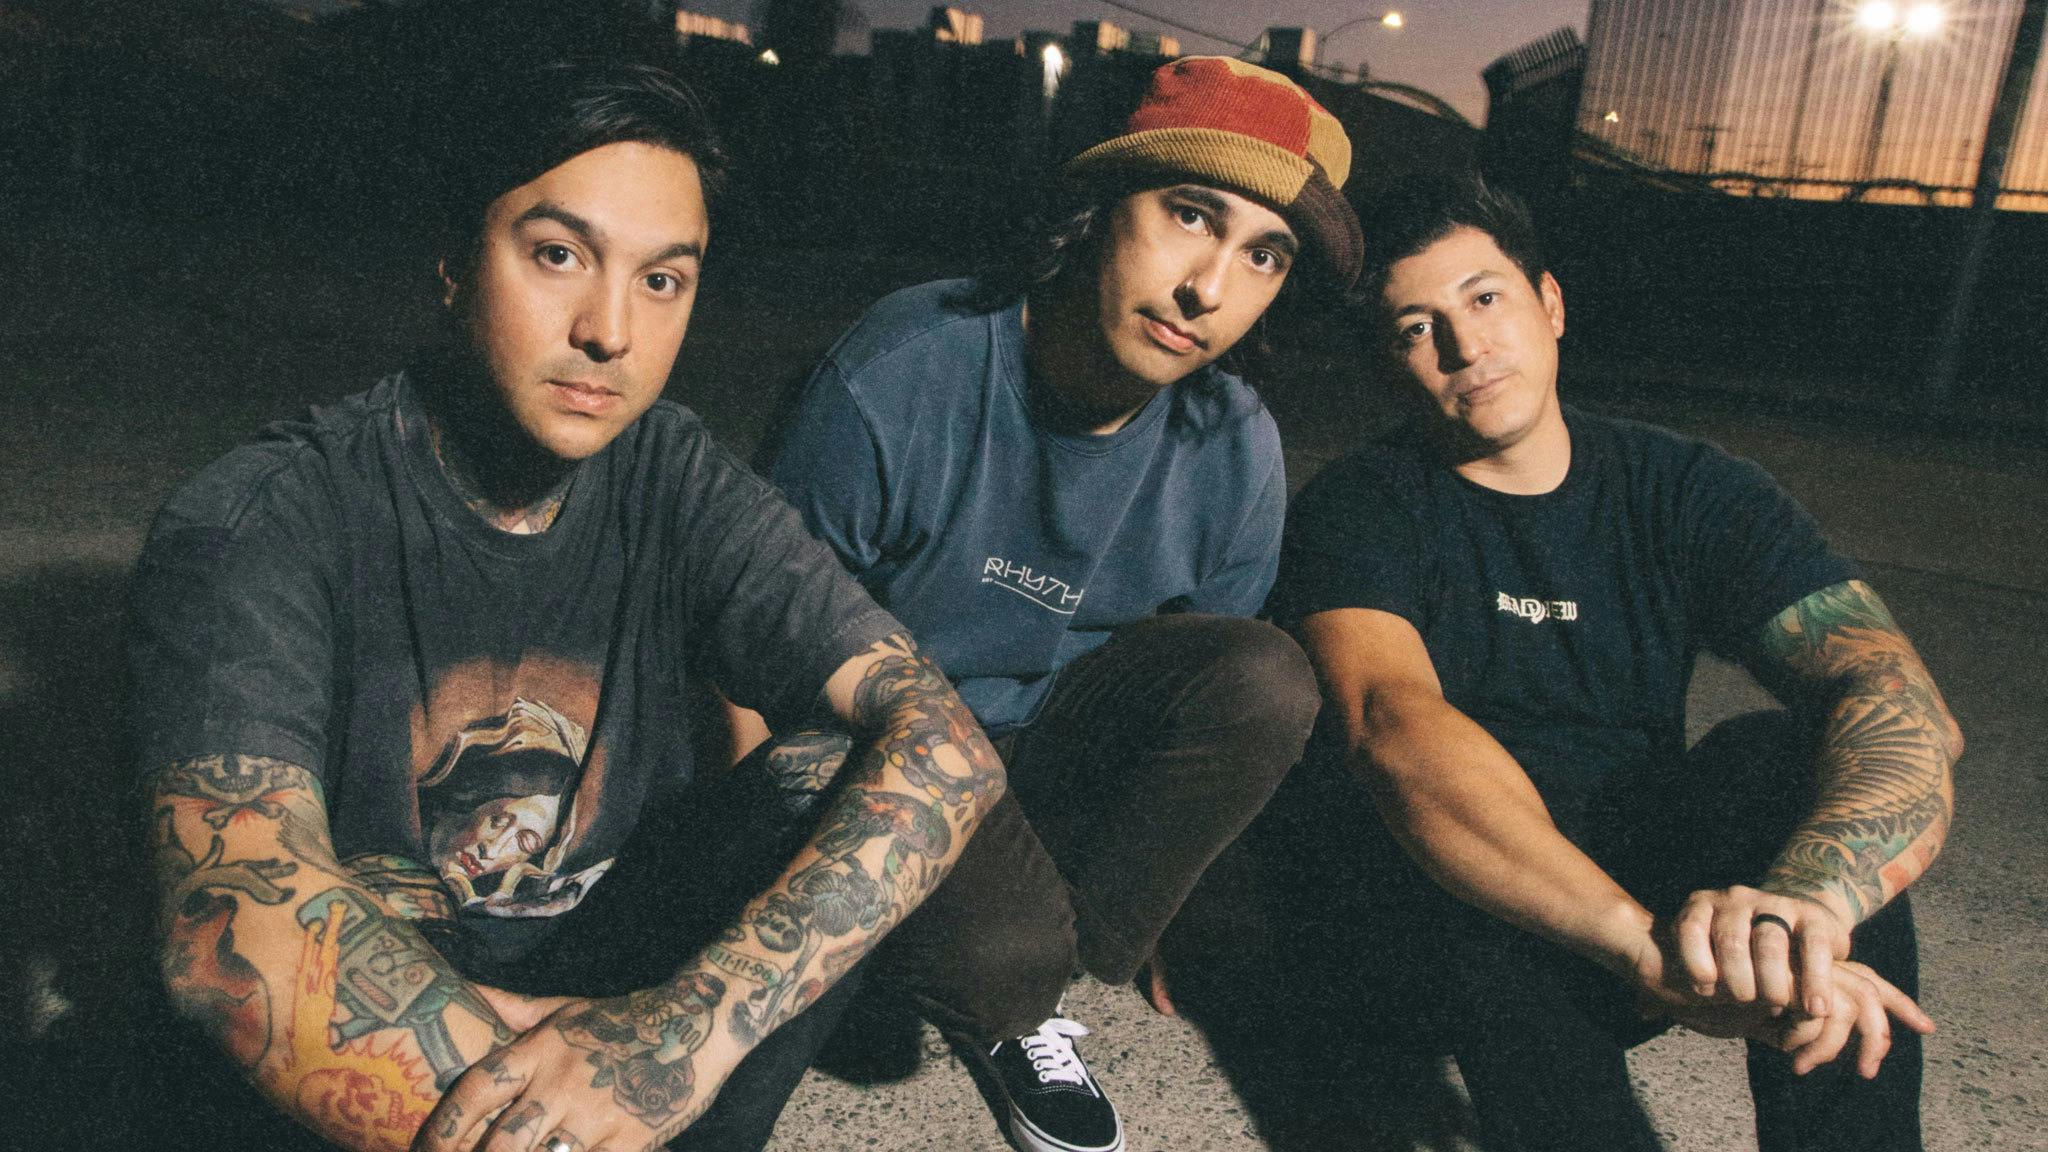 Pierce The Veil announce UK and Europe arena tour